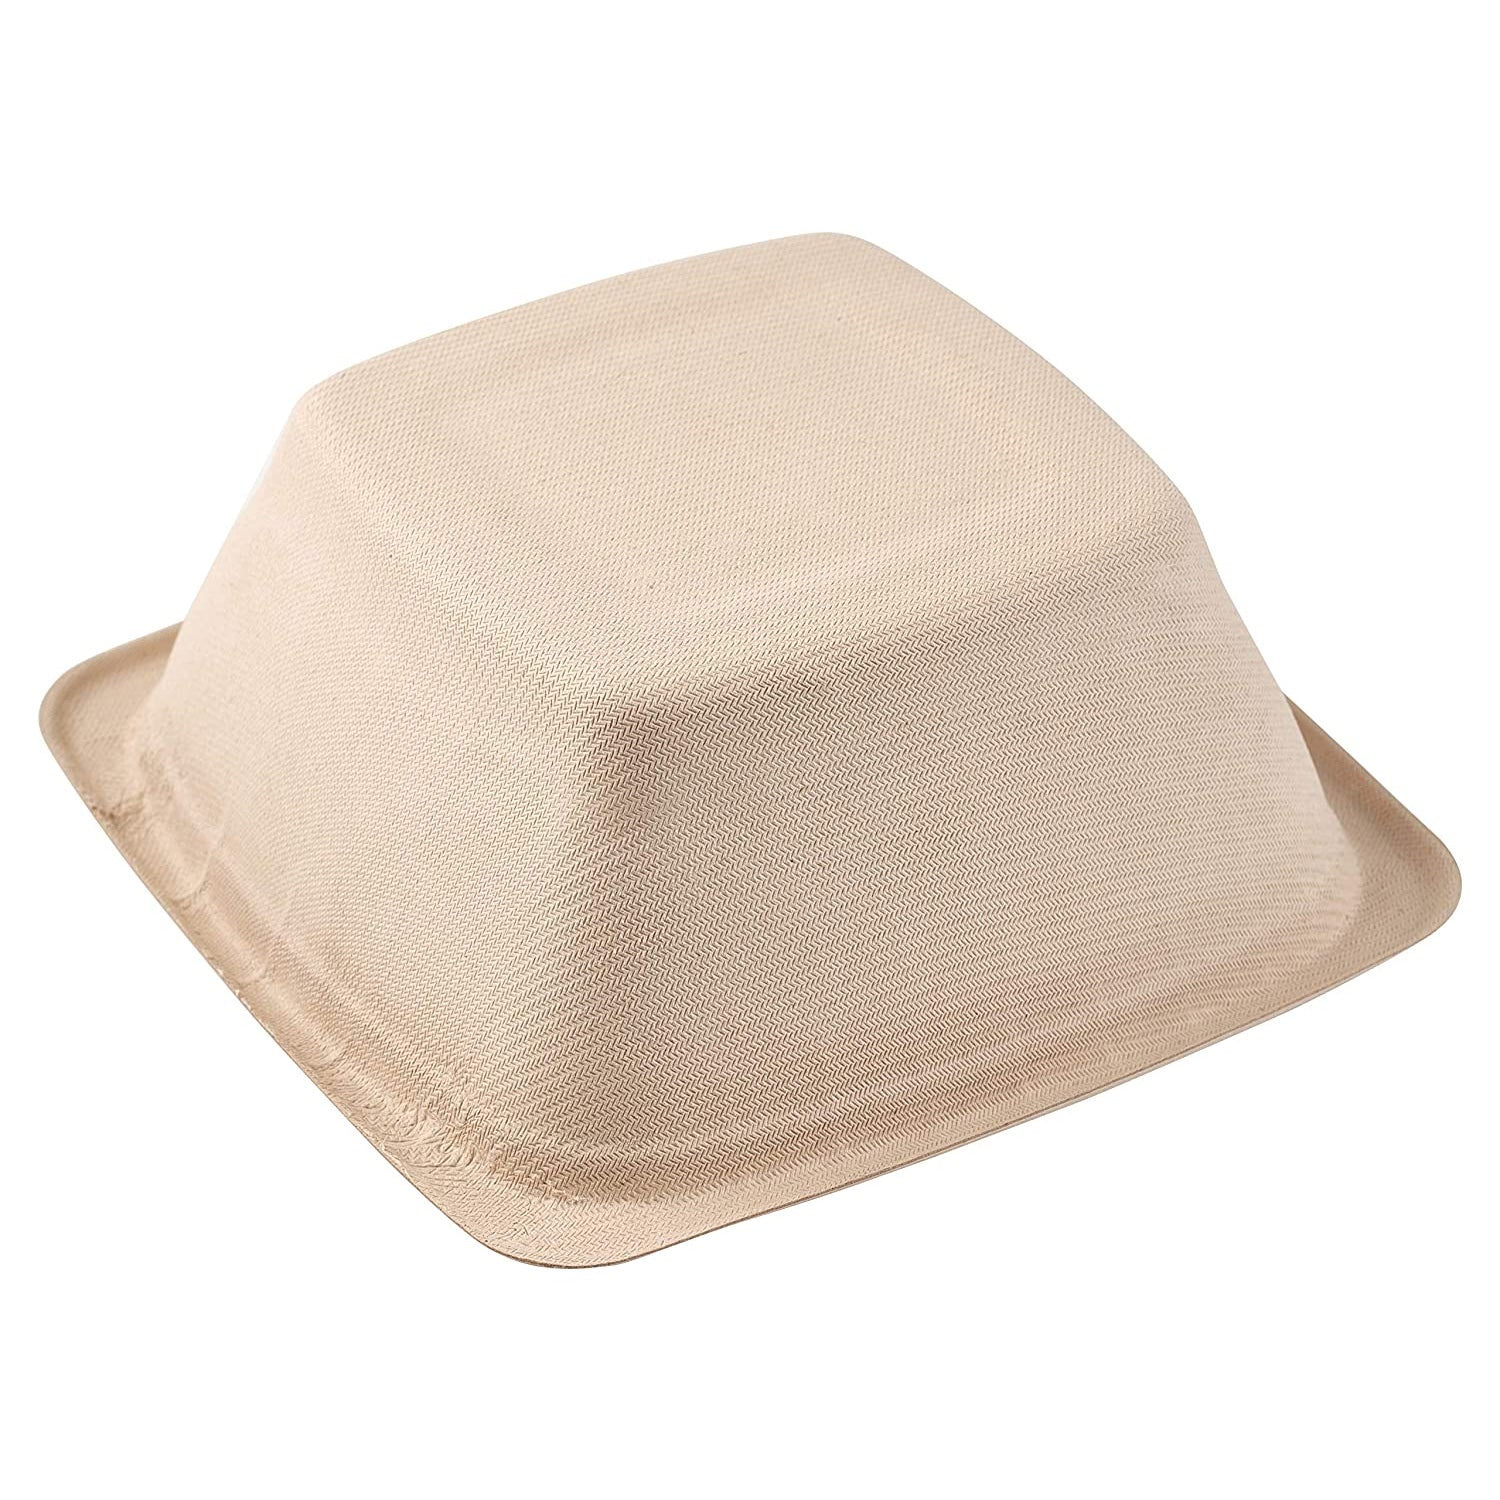 24oz Eco Friendly Disposable Square Bowls Compostable Container with Dome Lids